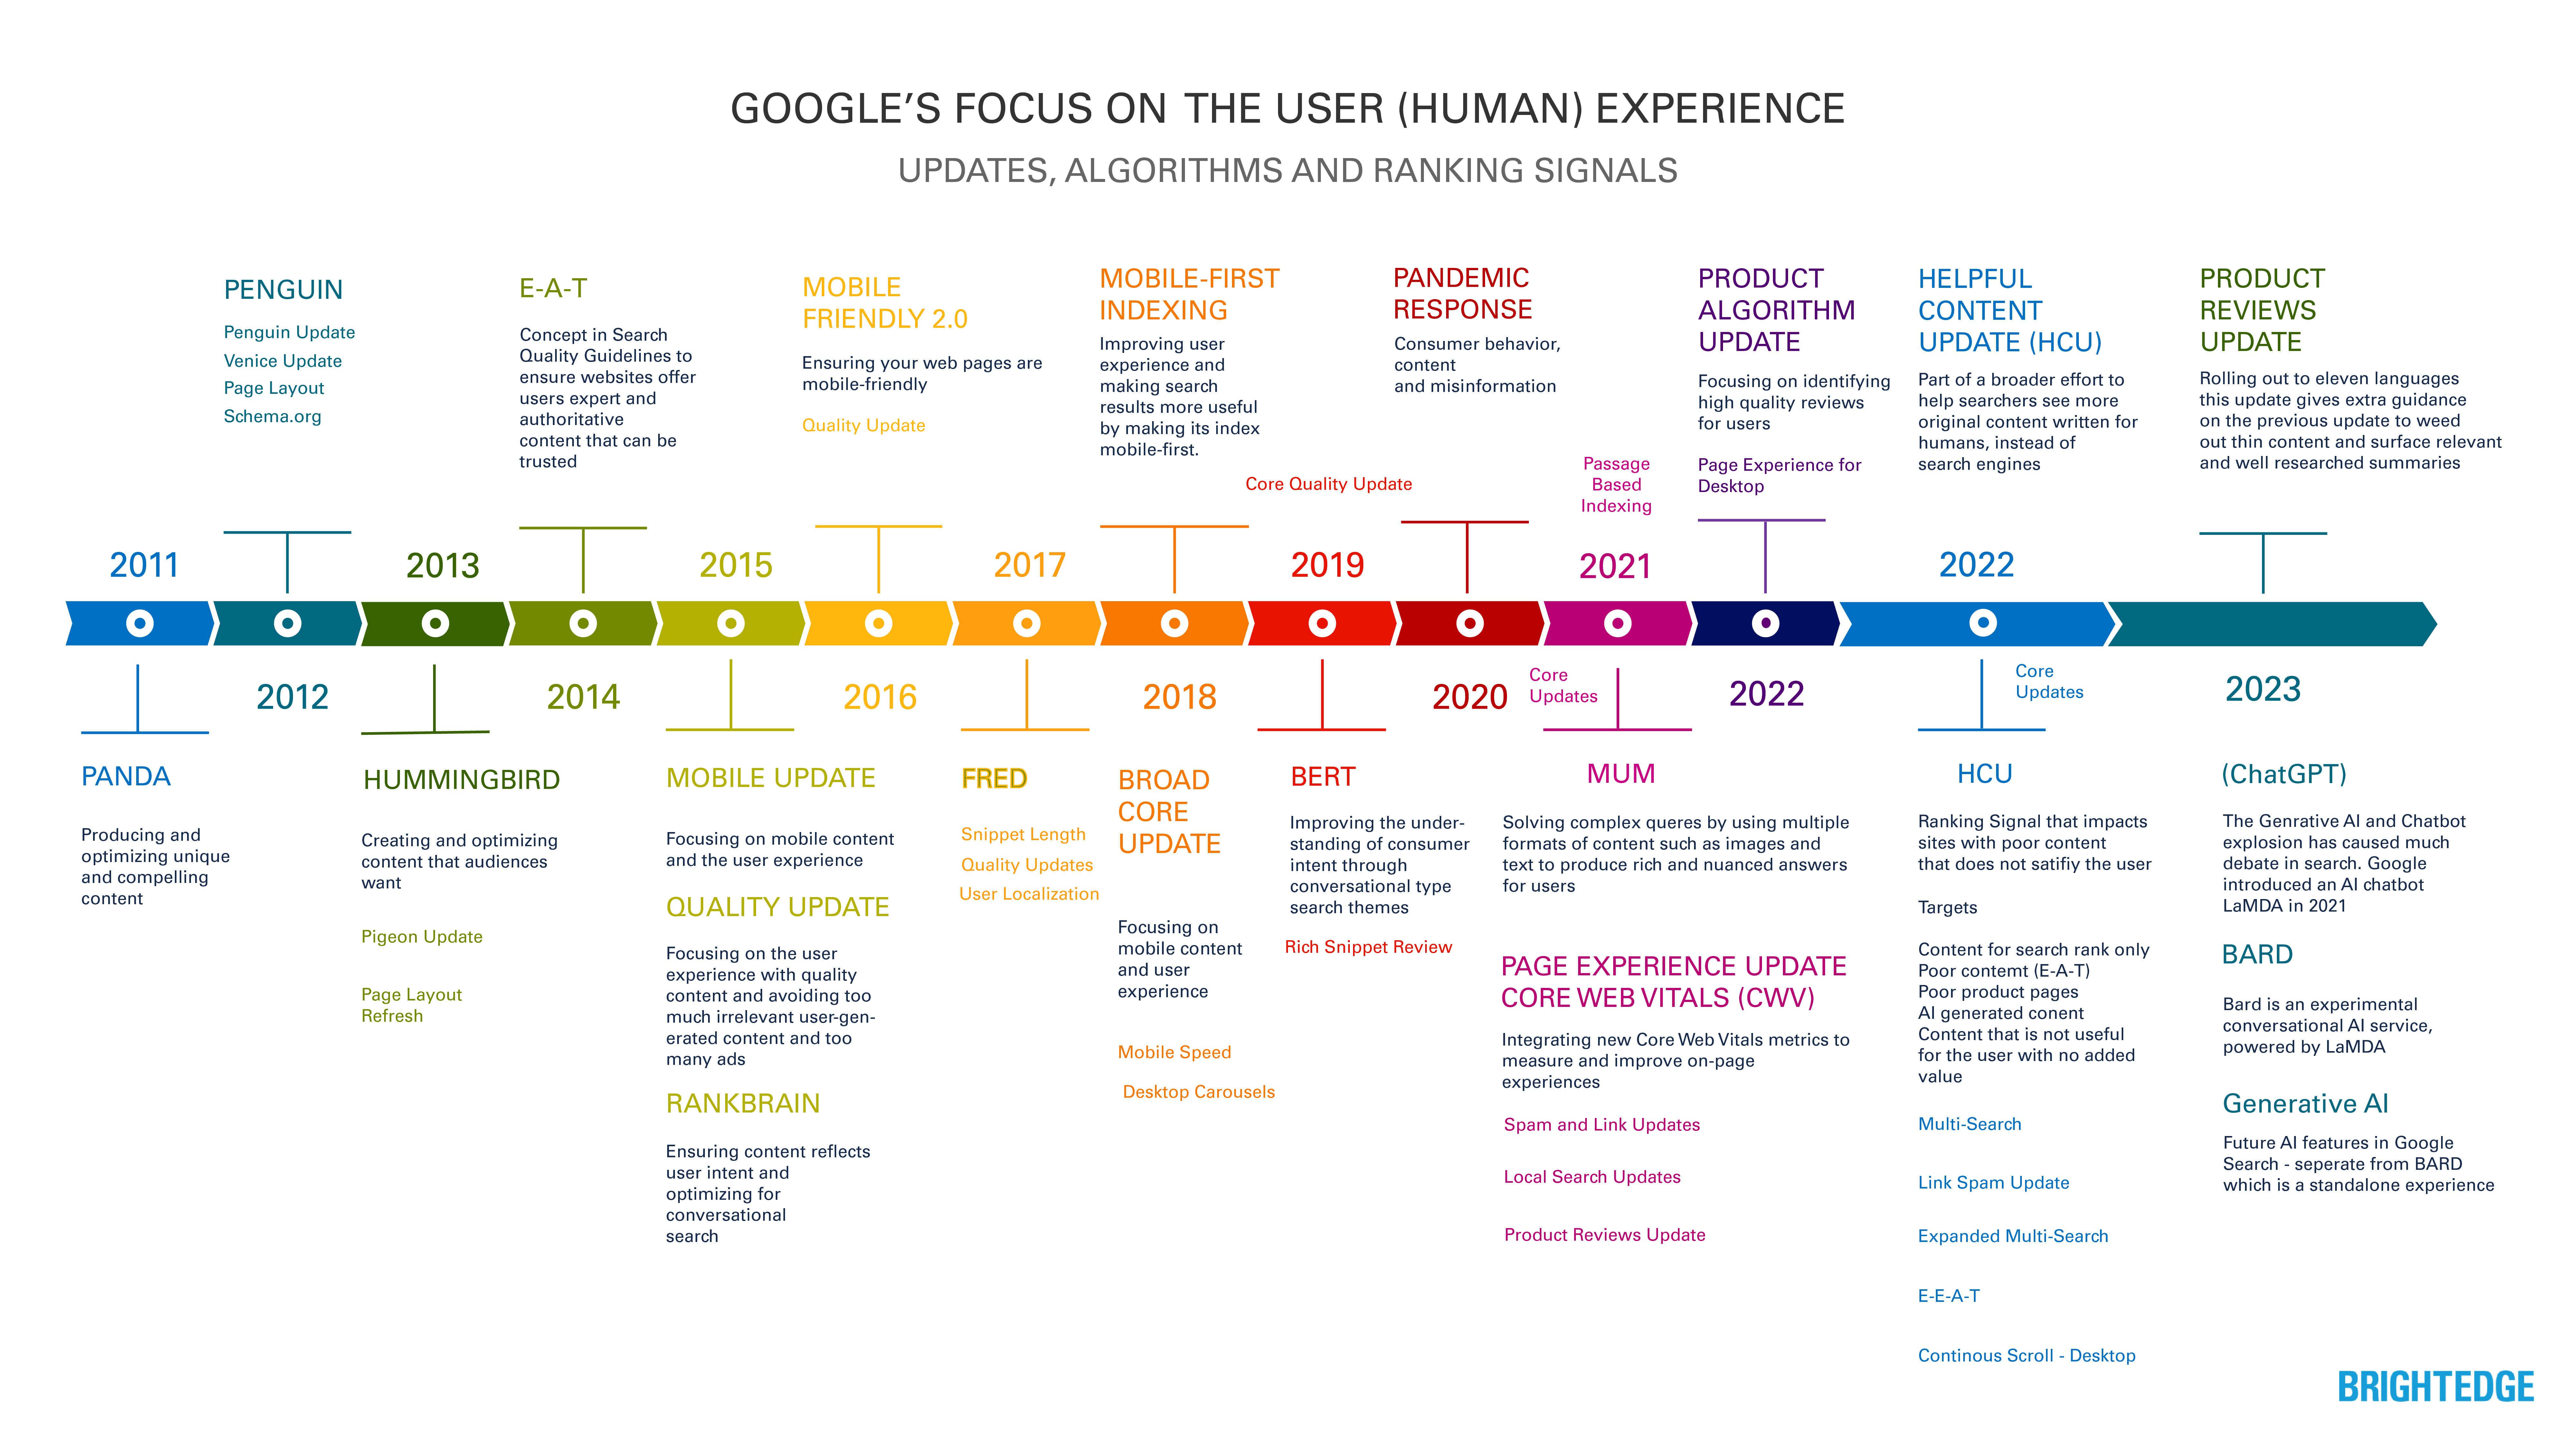 Google's Focus on the human experience